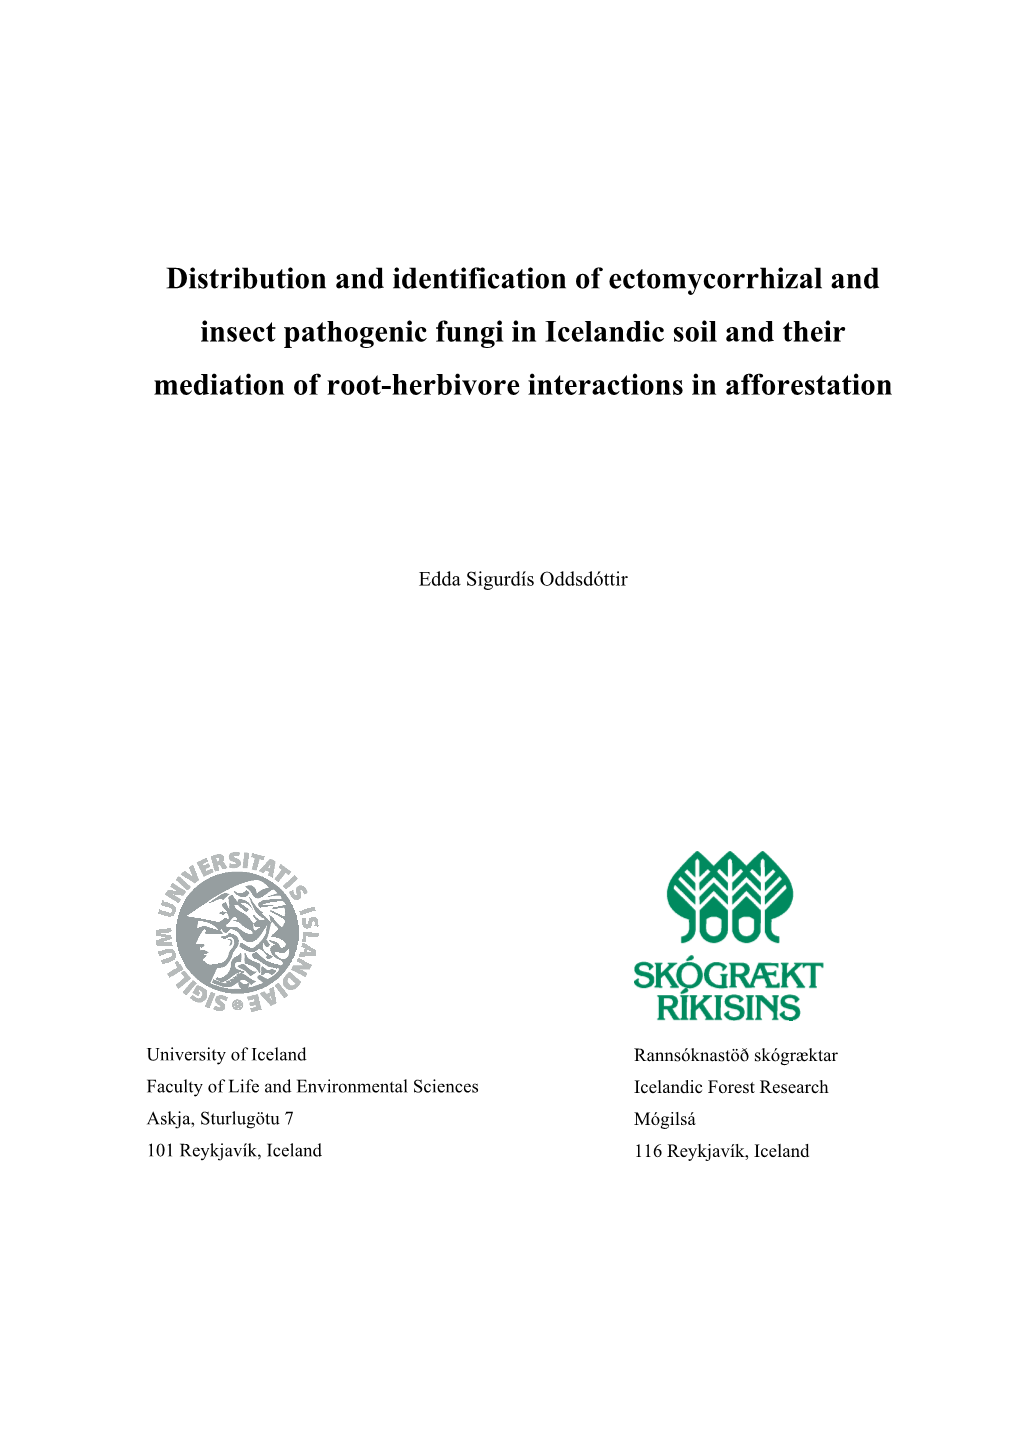 Distribution and Identification of Ectomycorrhizal and Insect Pathogenic Fungi in Icelandic Soil and Their Mediation of Root-Herbivore Interactions in Afforestation